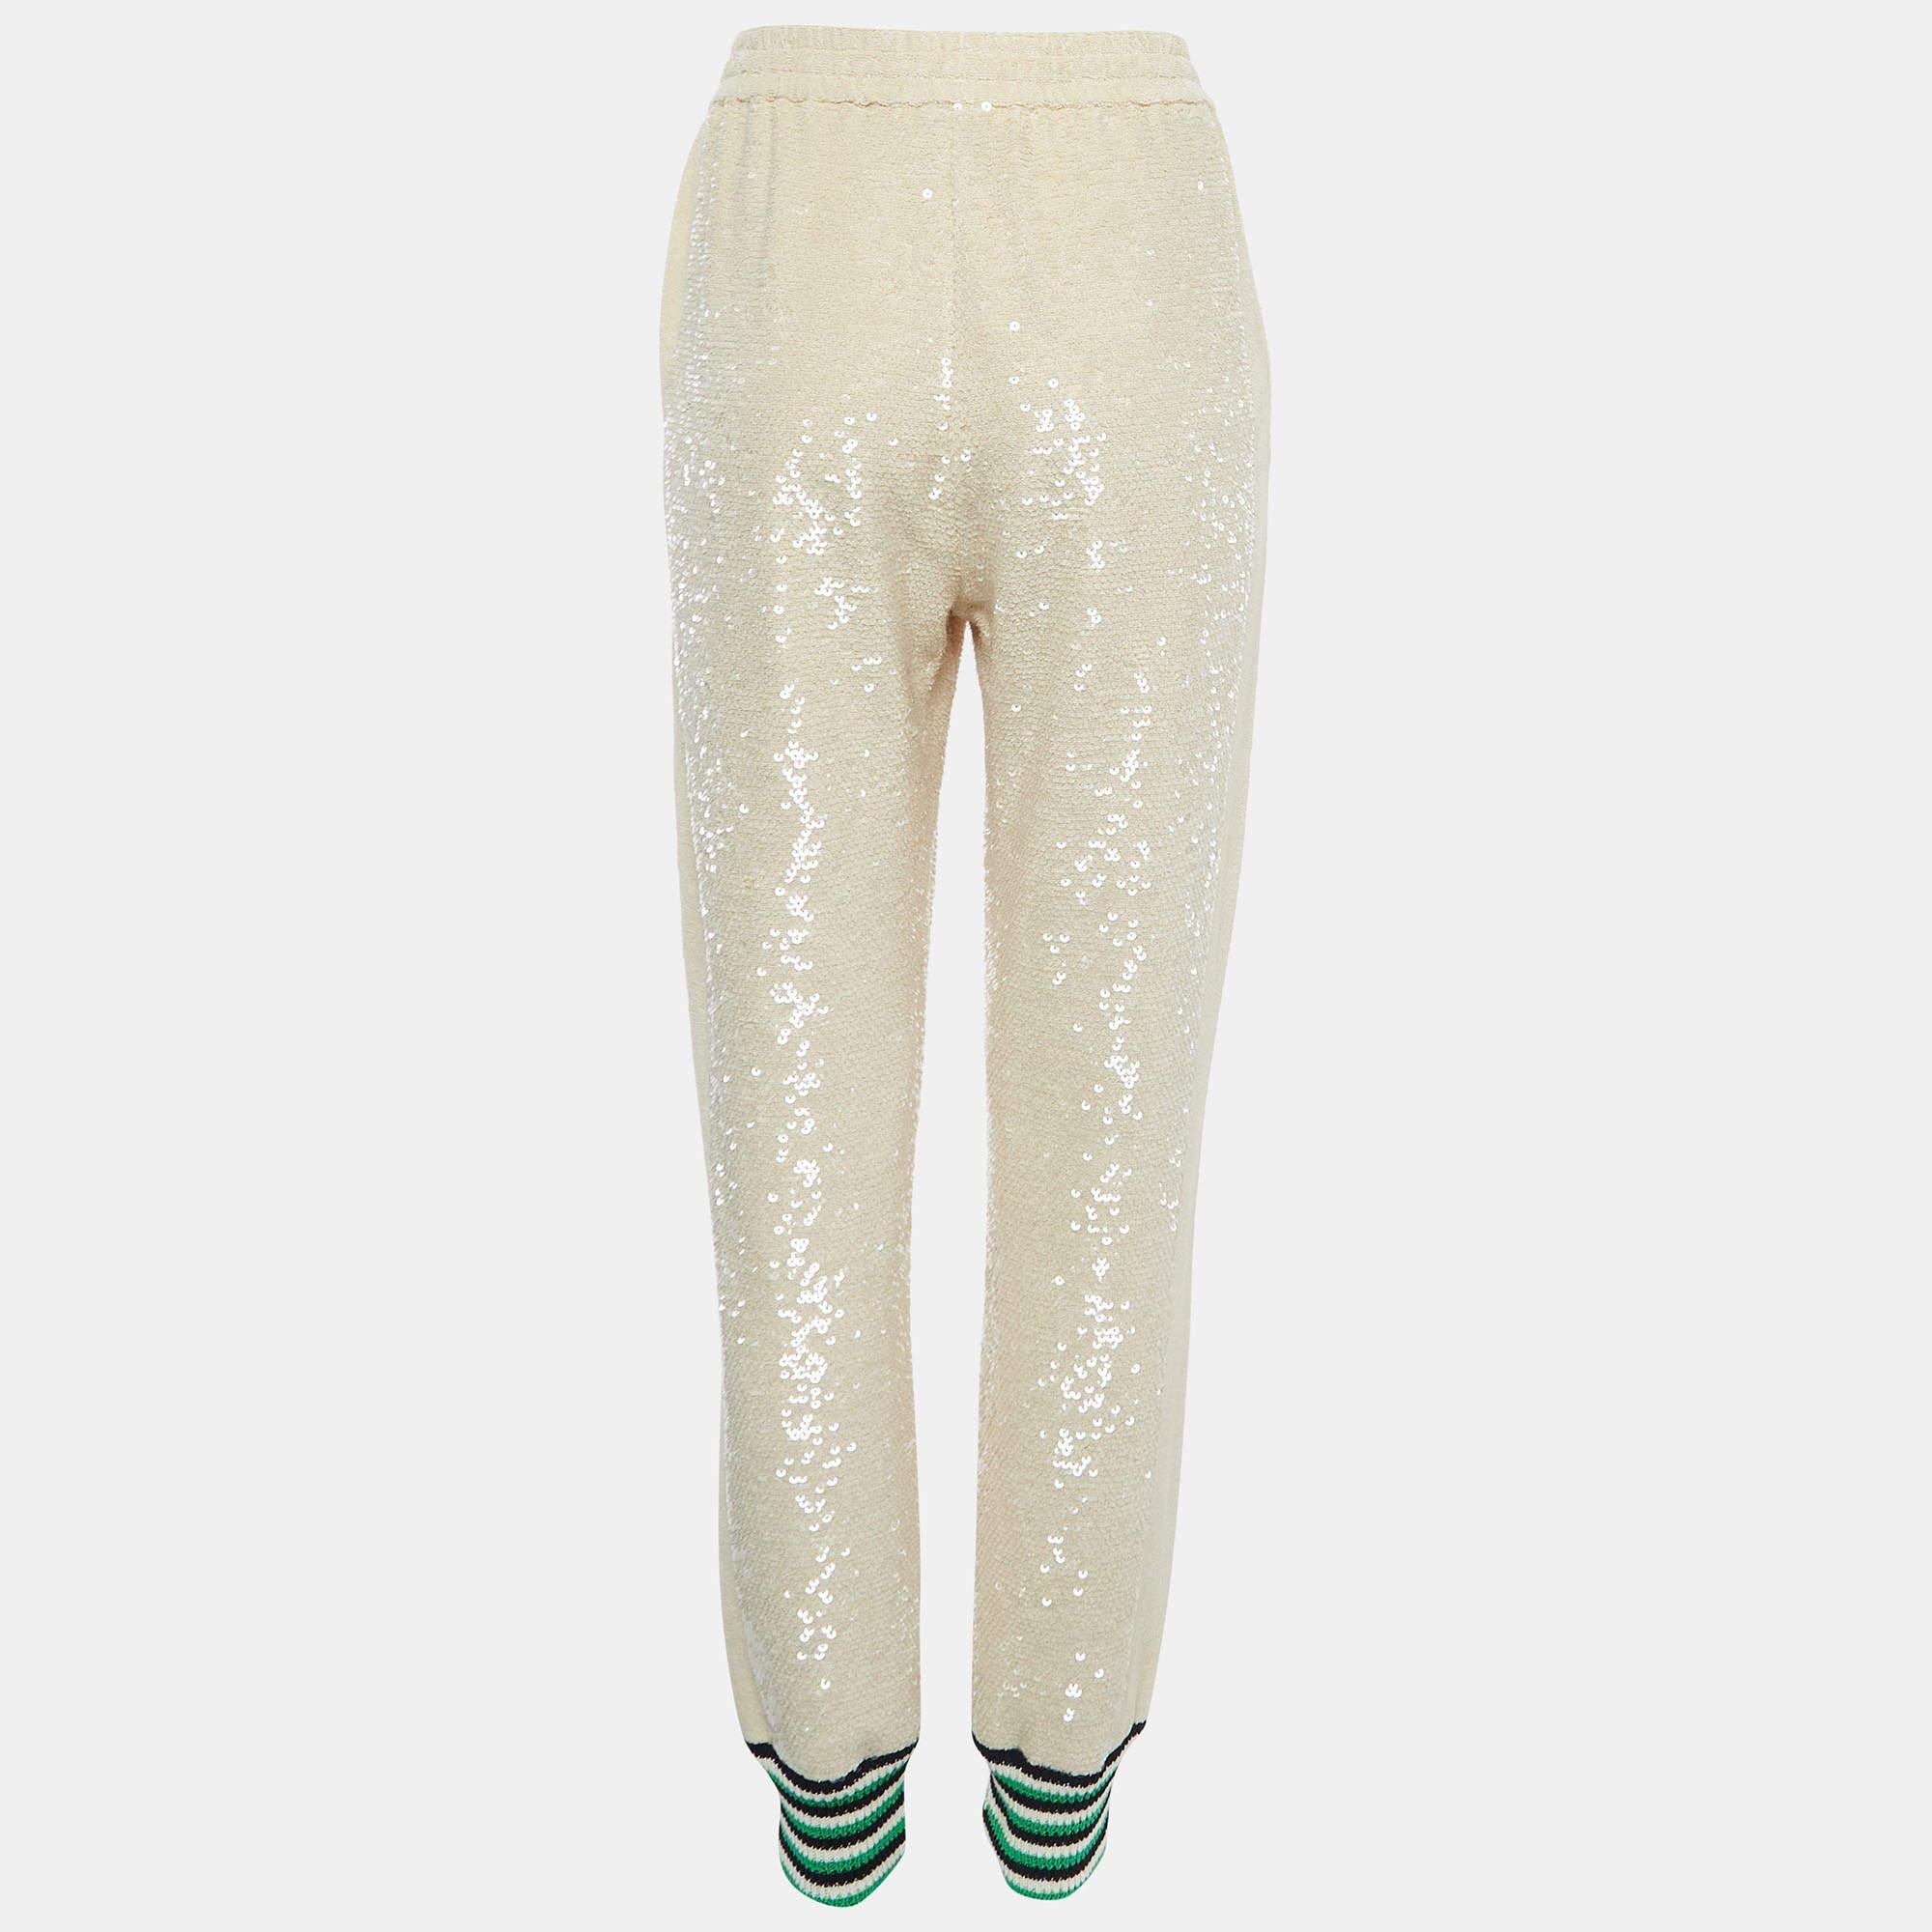 The Gucci joggers feature a luxurious blend of comfort and style. Crafted from high-quality cotton, the joggers showcase a beige hue adorned with sequins, creating a glamorous and effortlessly chic look. The drawstring waist adds a touch of